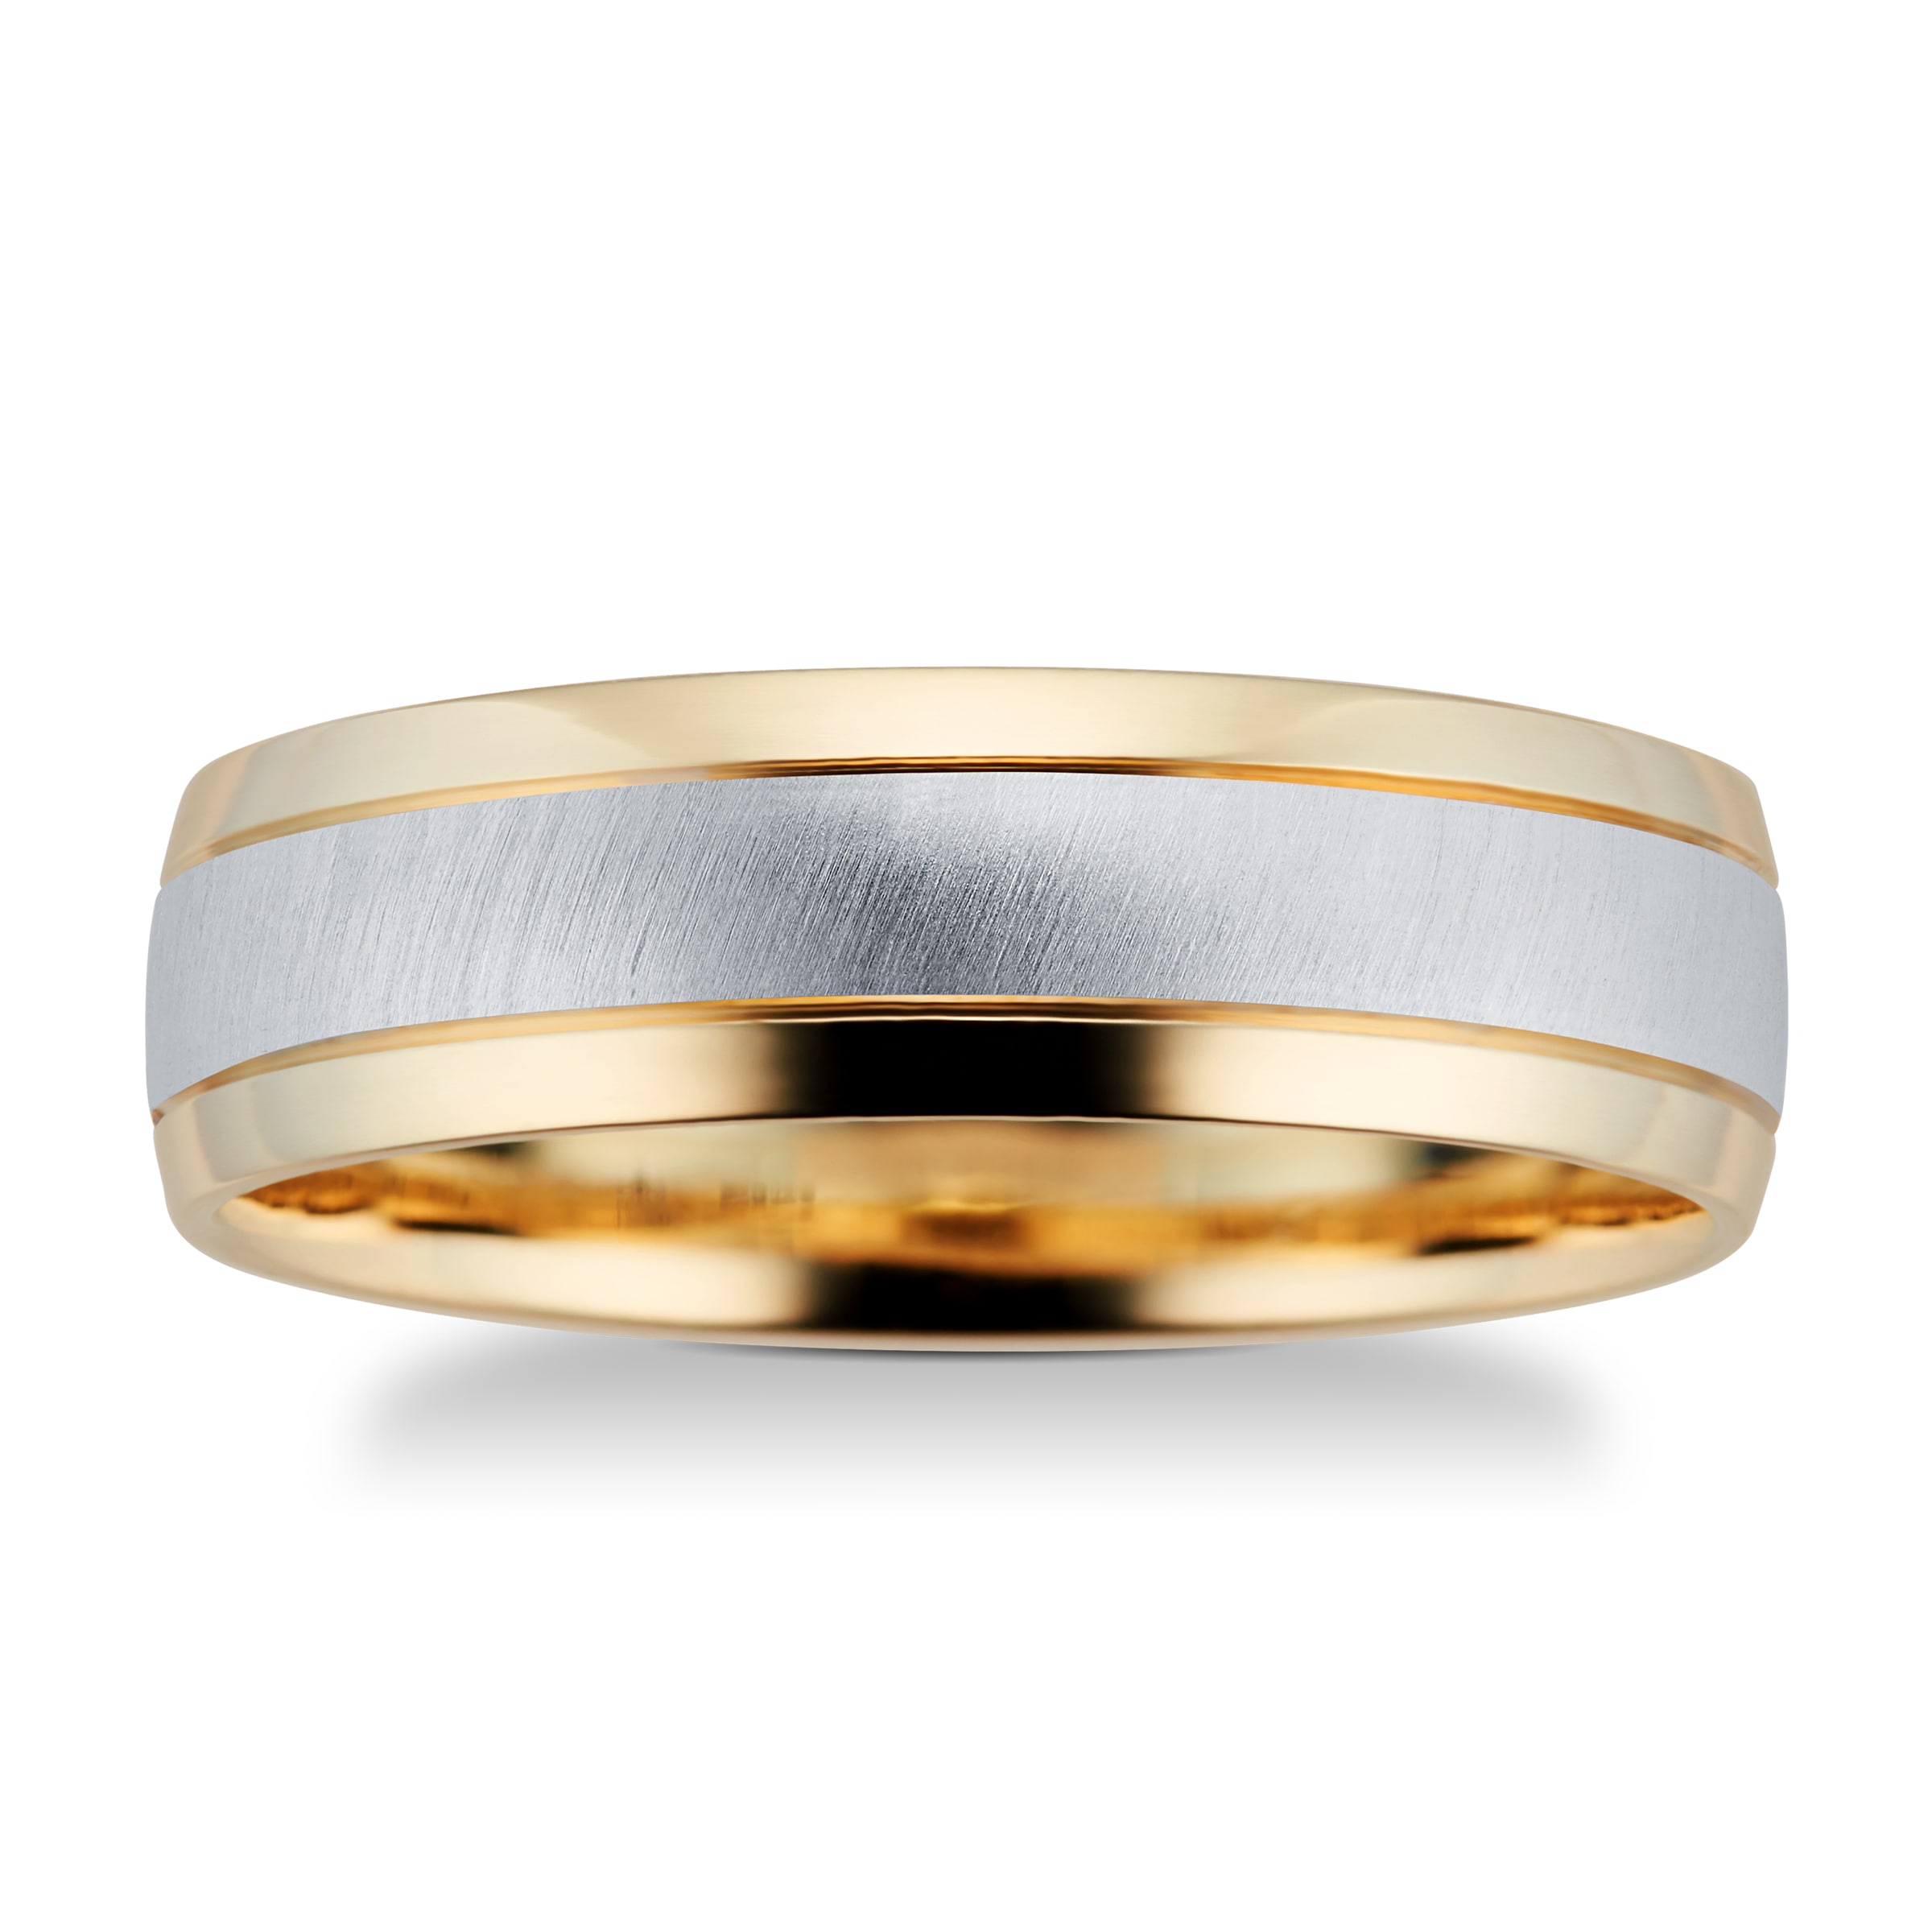 Gents 9ct Gold Two Tone 6mm Fancy Court Wedding Band - Ring Size P